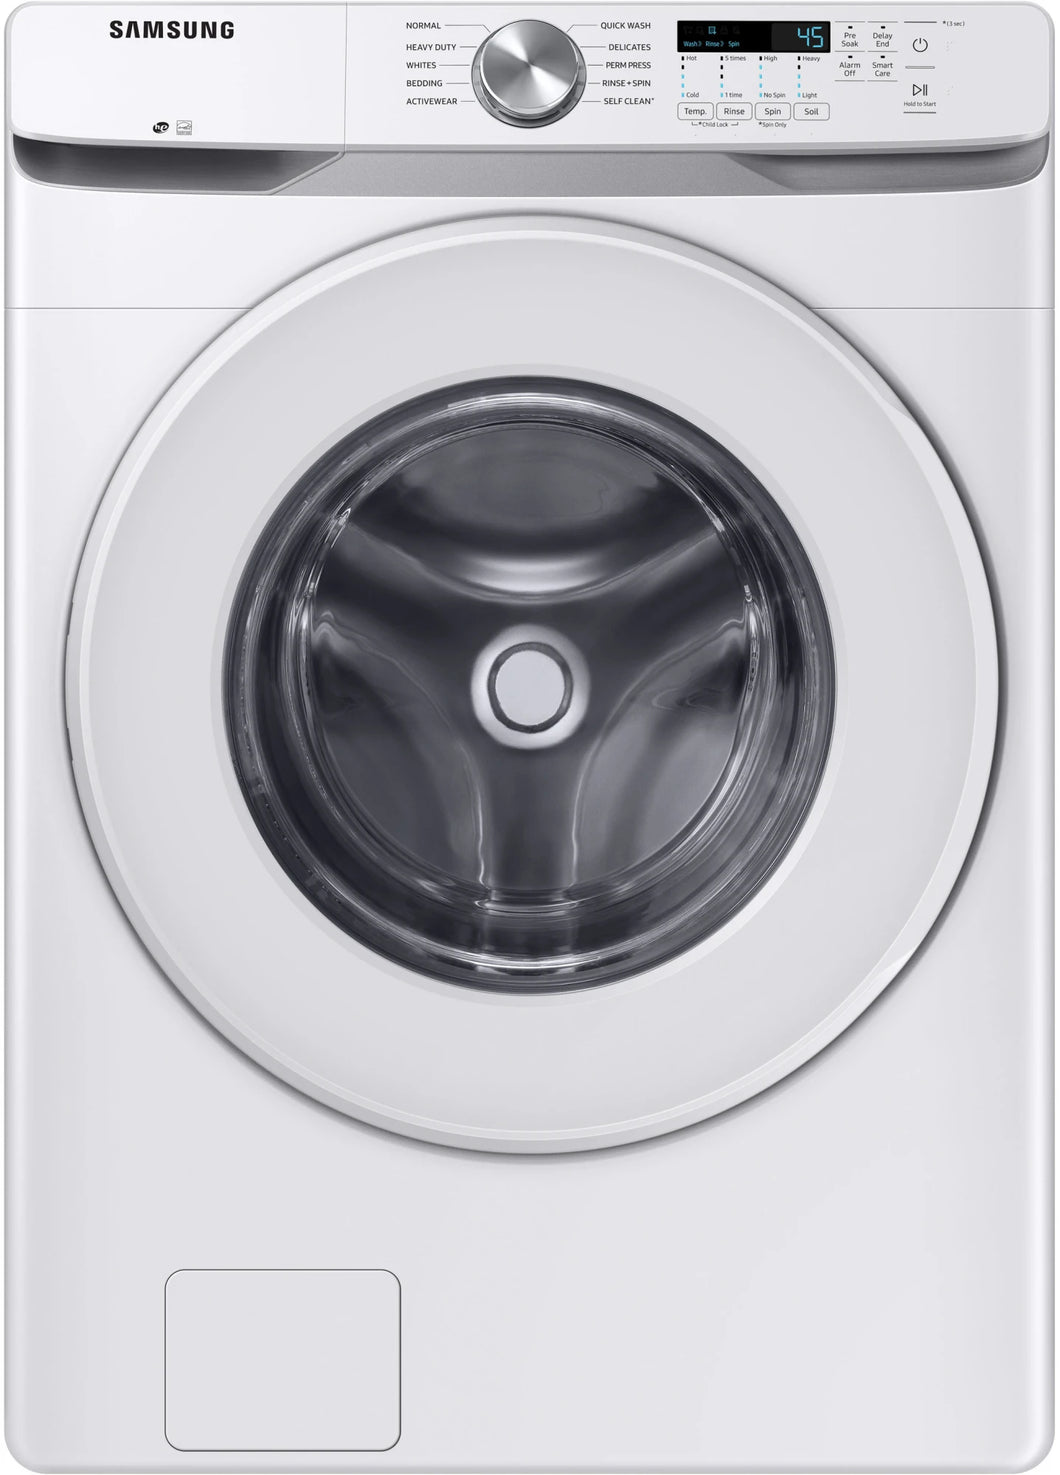 WF45T6000AW - WASHERS - Samsung - Front Load - White - Open Box - WASHERS - BonPrix Électroménagers